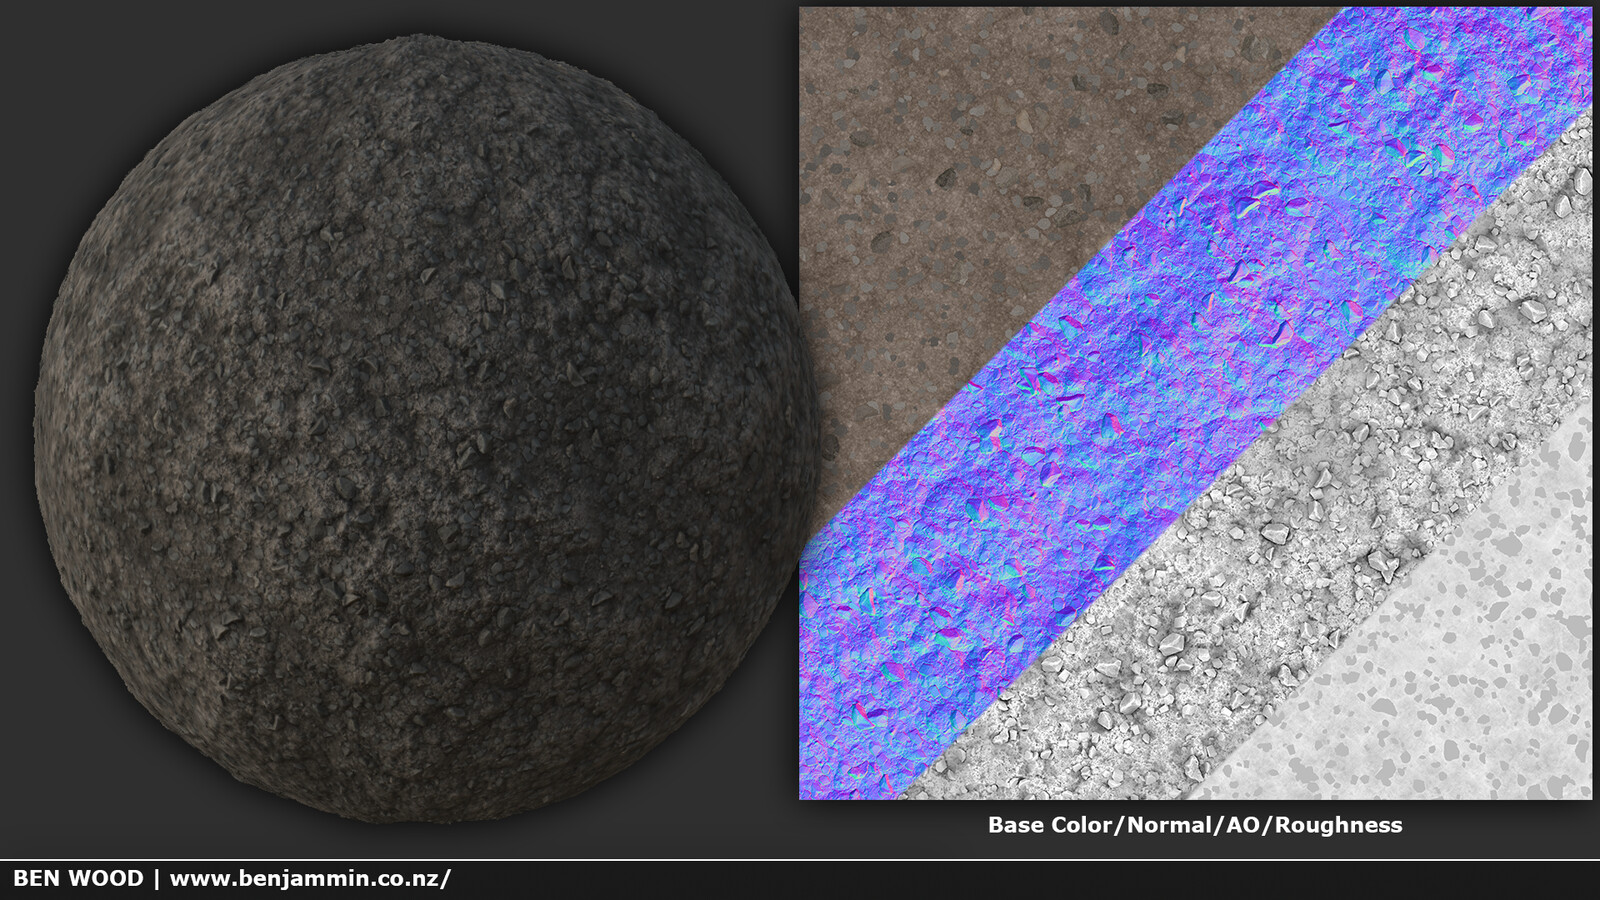 Rocky ground surface - the individual stones were photogrammetry scans, captured as height maps with Zbrush